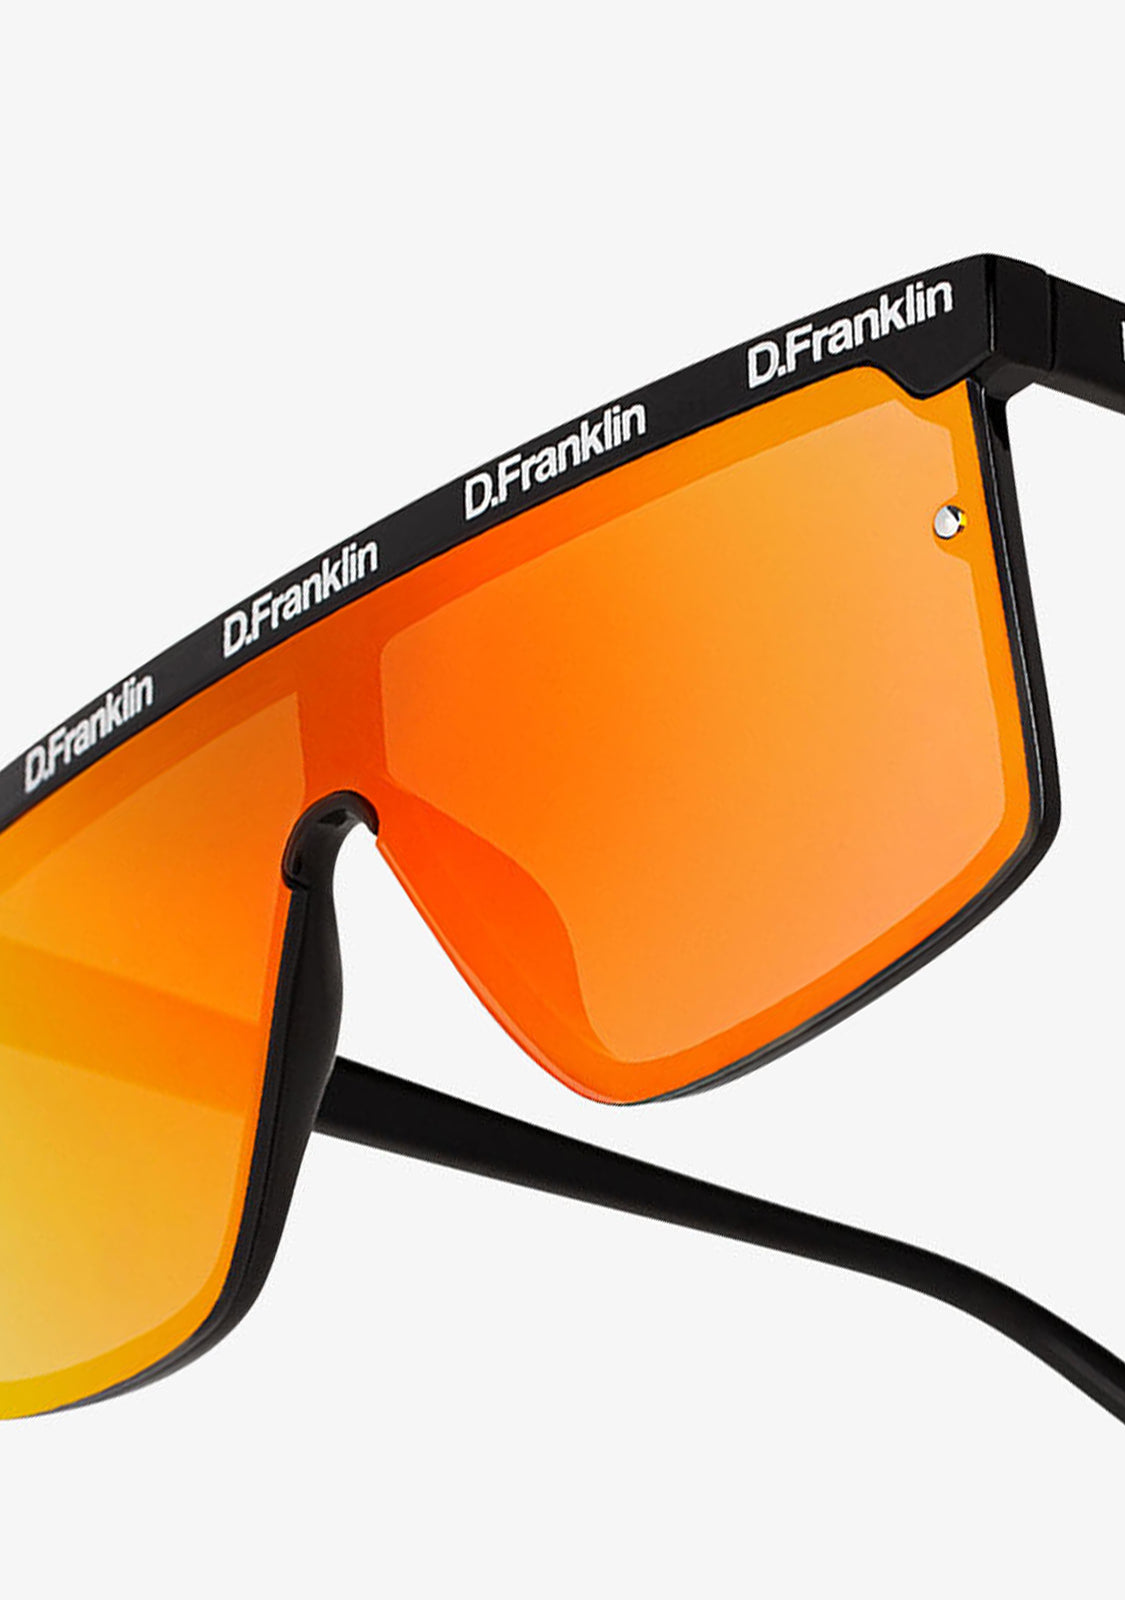 D.Franklin - New colors available of the ORION Model. Always on style  wearing D.Franklin Sunglasses Discover all new at www.dfranklincreation.com